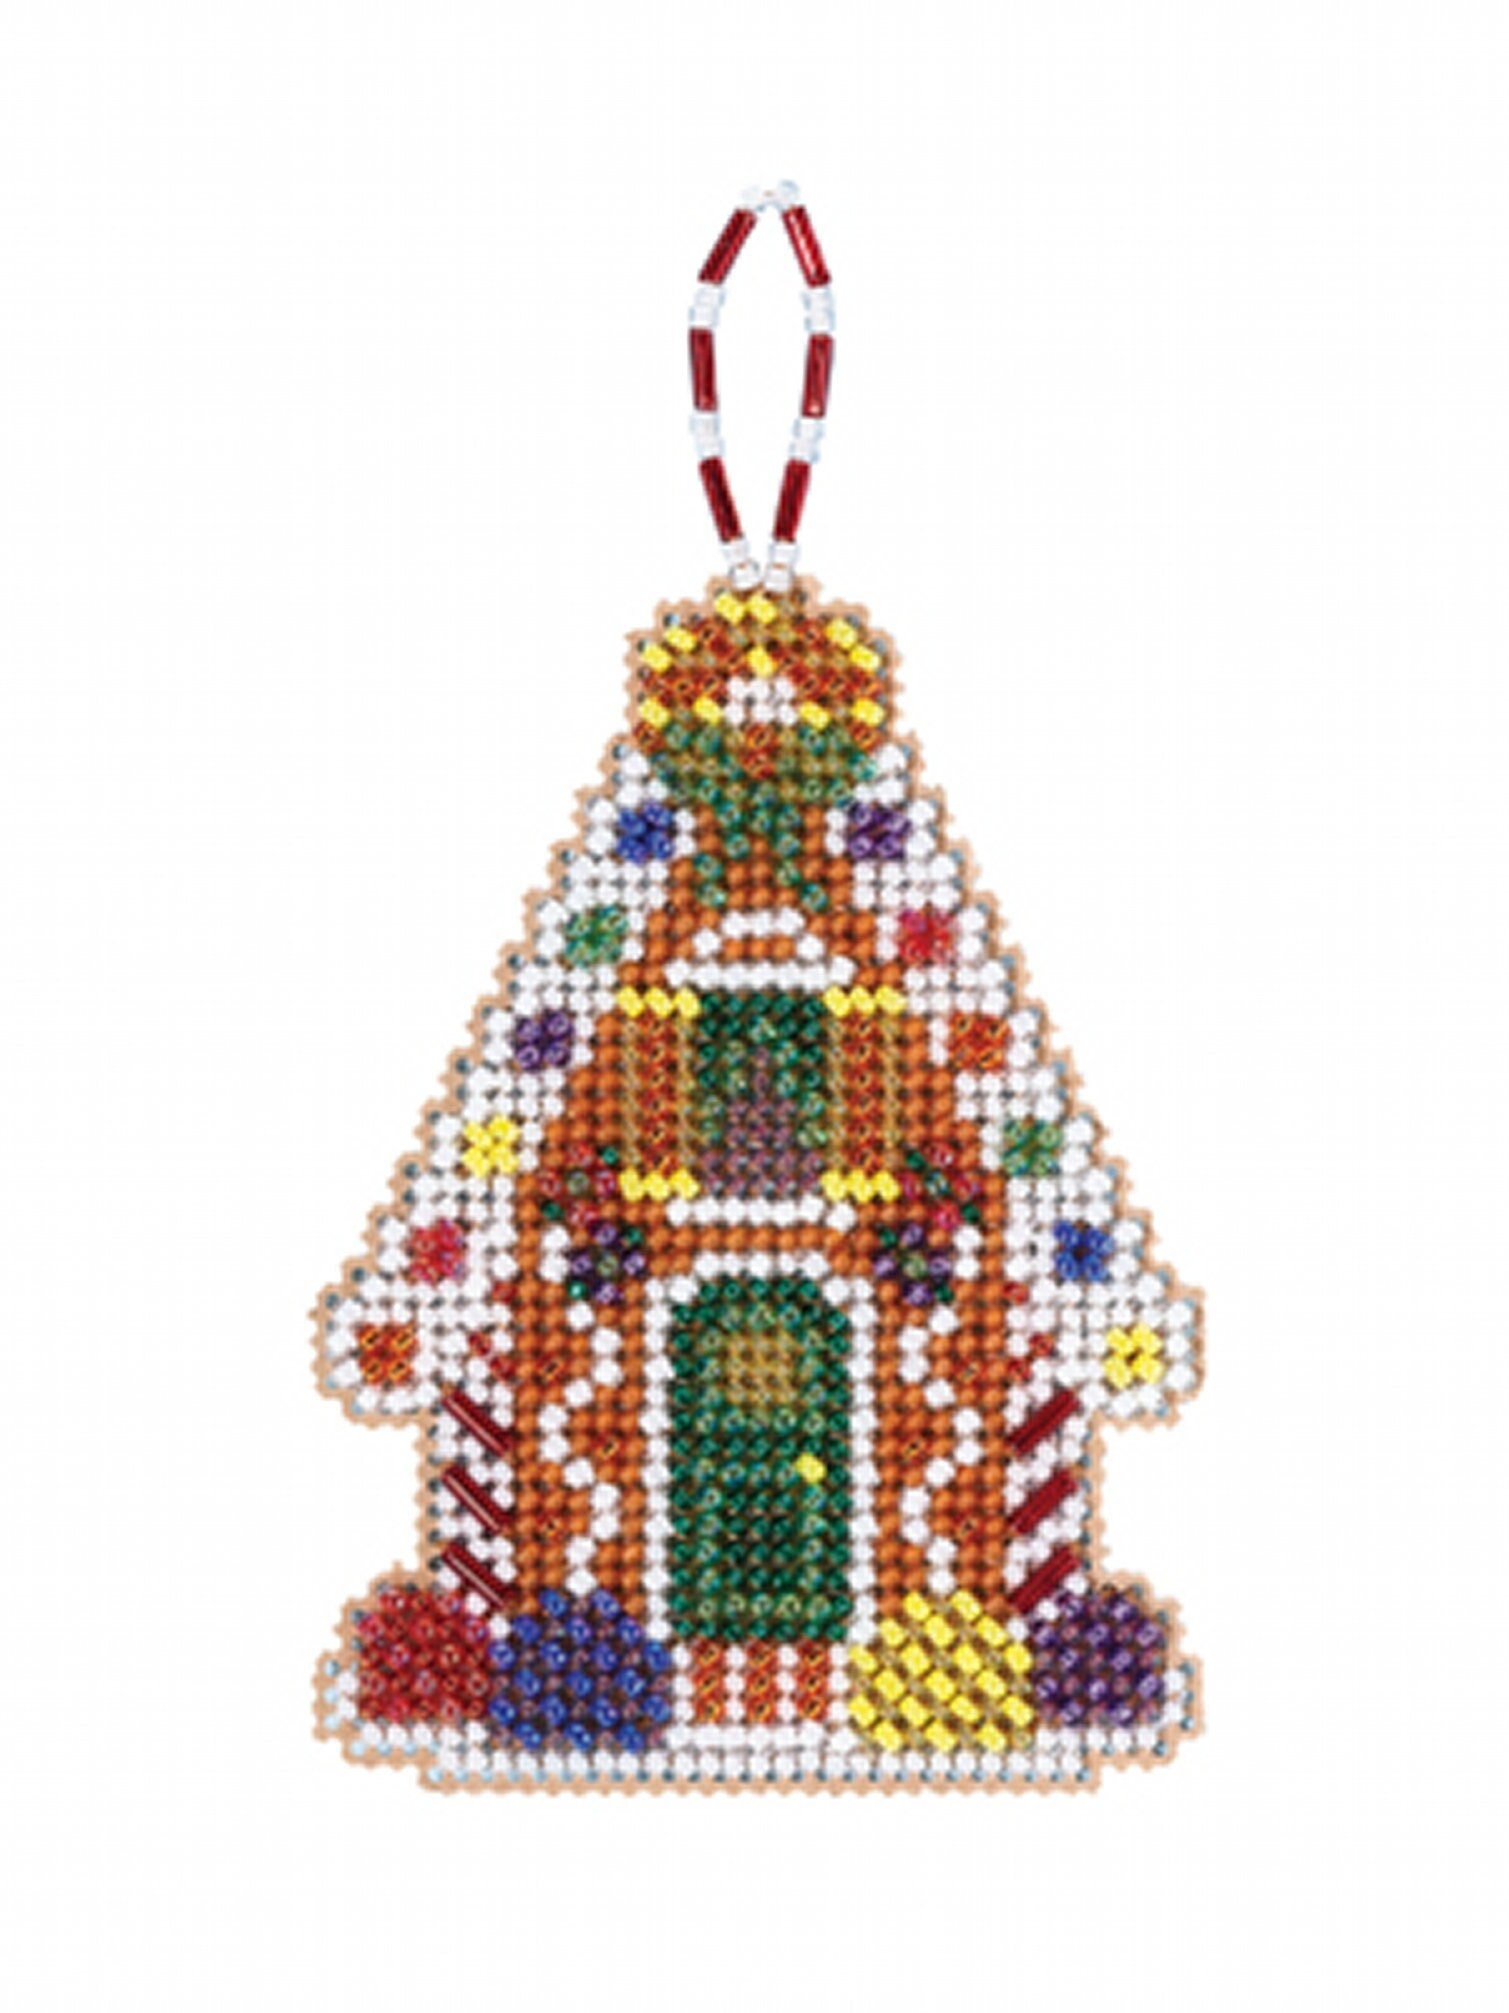 Gingerbread Lad Cross Stitch Ornament Kit Mill Hill 2021 Beaded Holiday  MH212111 